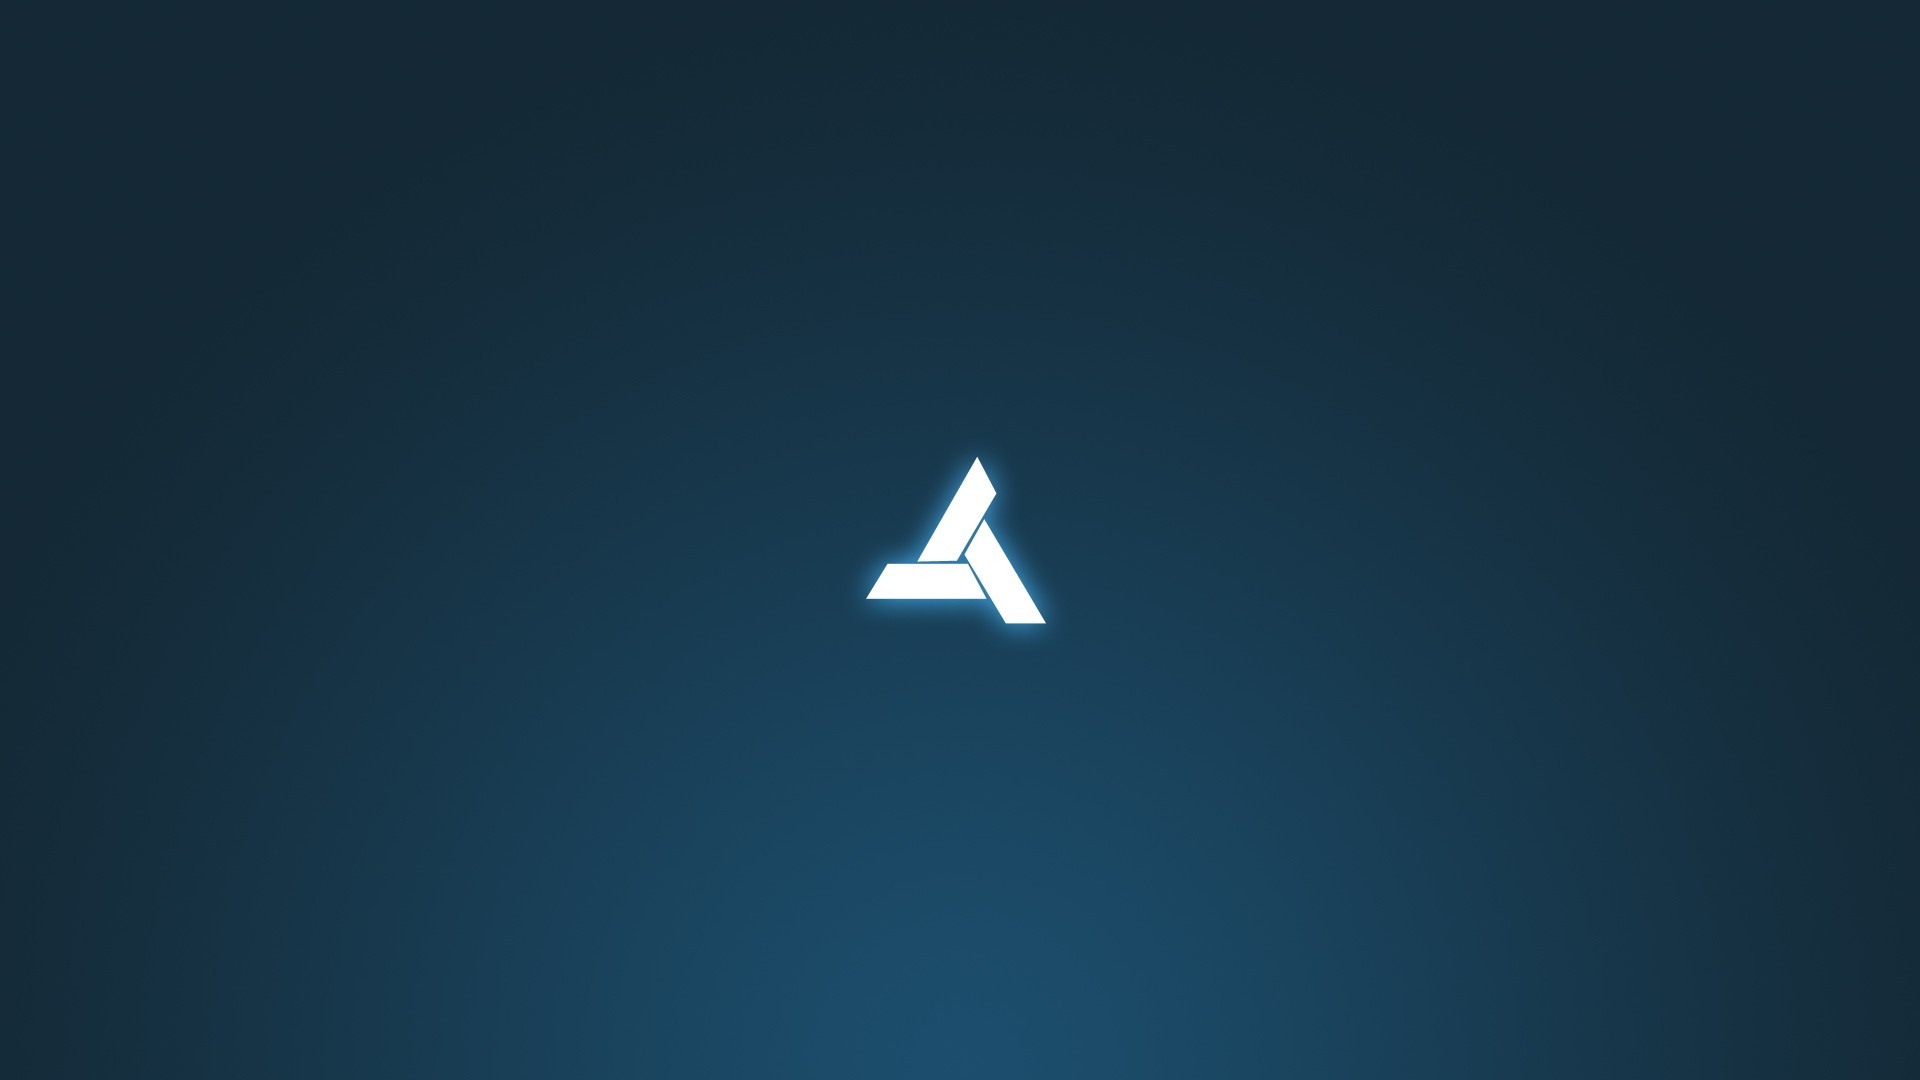 1920x1080 sky vehicle logo abstergo shape screenshot  px assassins creed  computer wallpaper atmosphere of earth